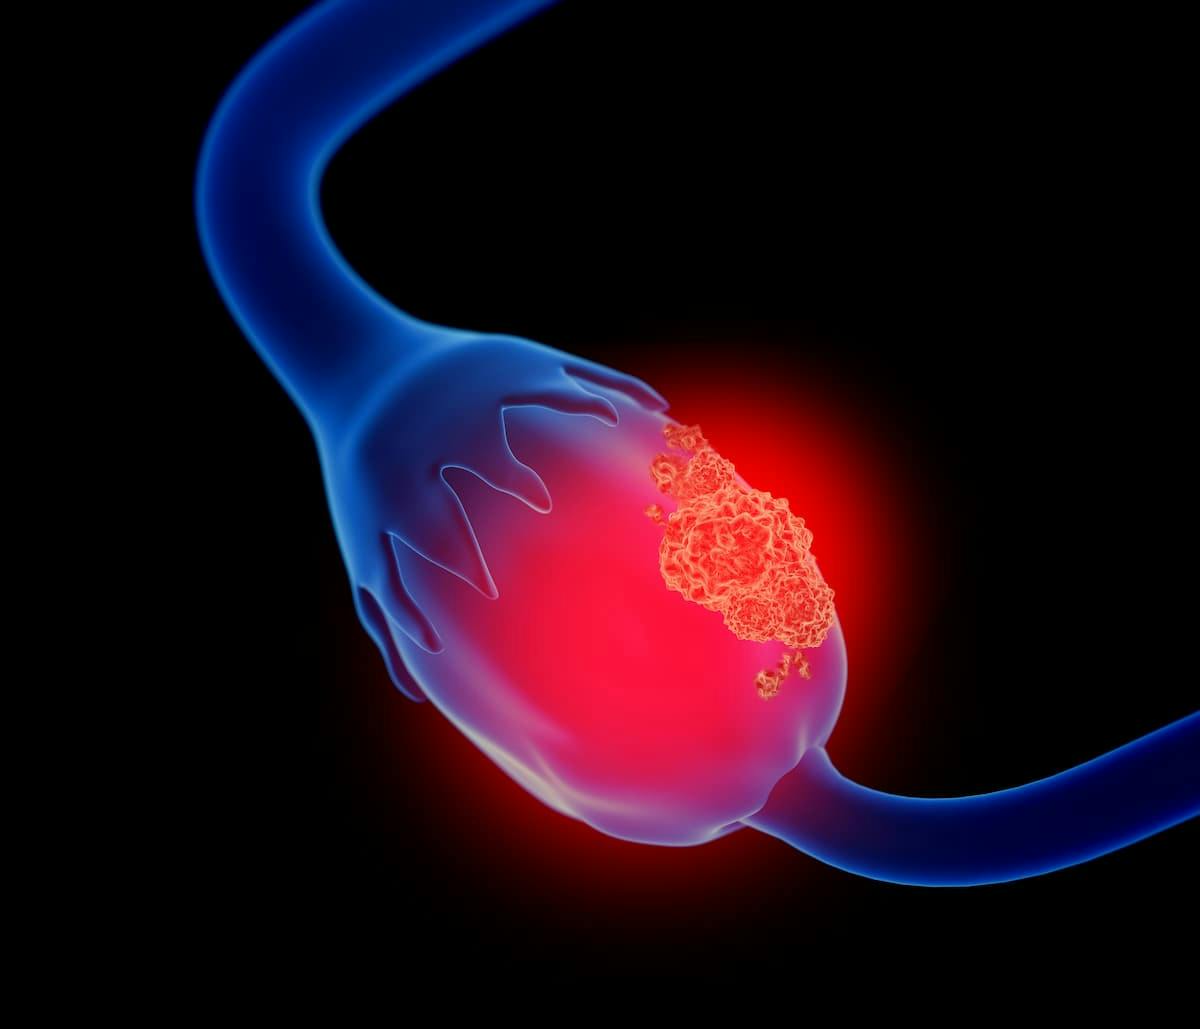  Addition of Dual Checkpoint Blockade Inhibition Improves PFS in Ovarian Cancer  |  Image Credit: © Lars Neumann - stock.adobe.com.